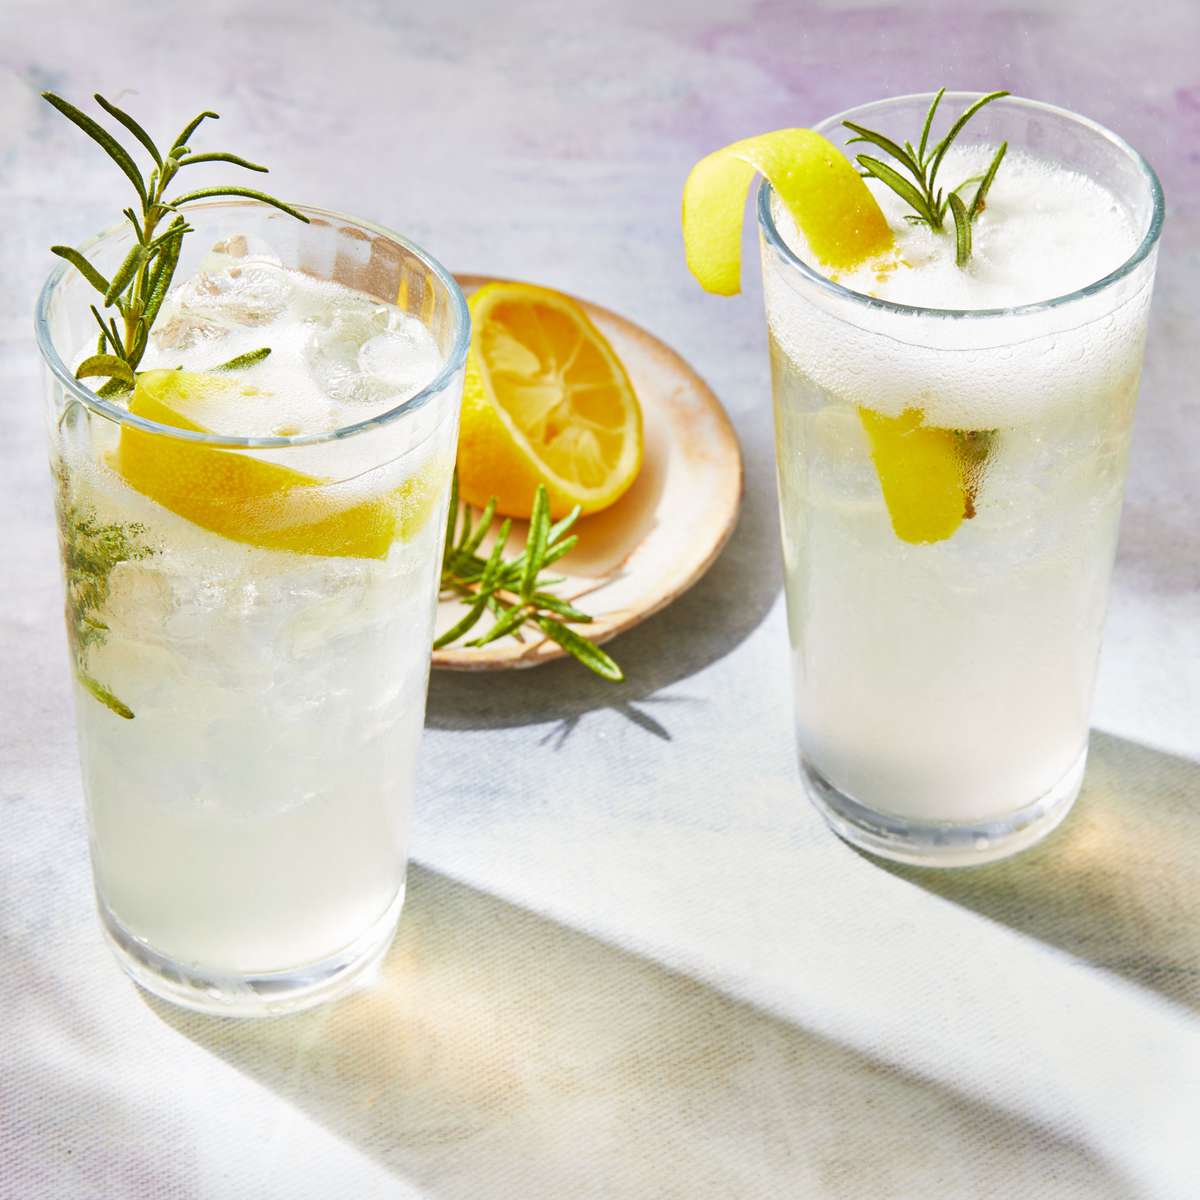 two glasses of cocktail with lemon and thyme garnishes